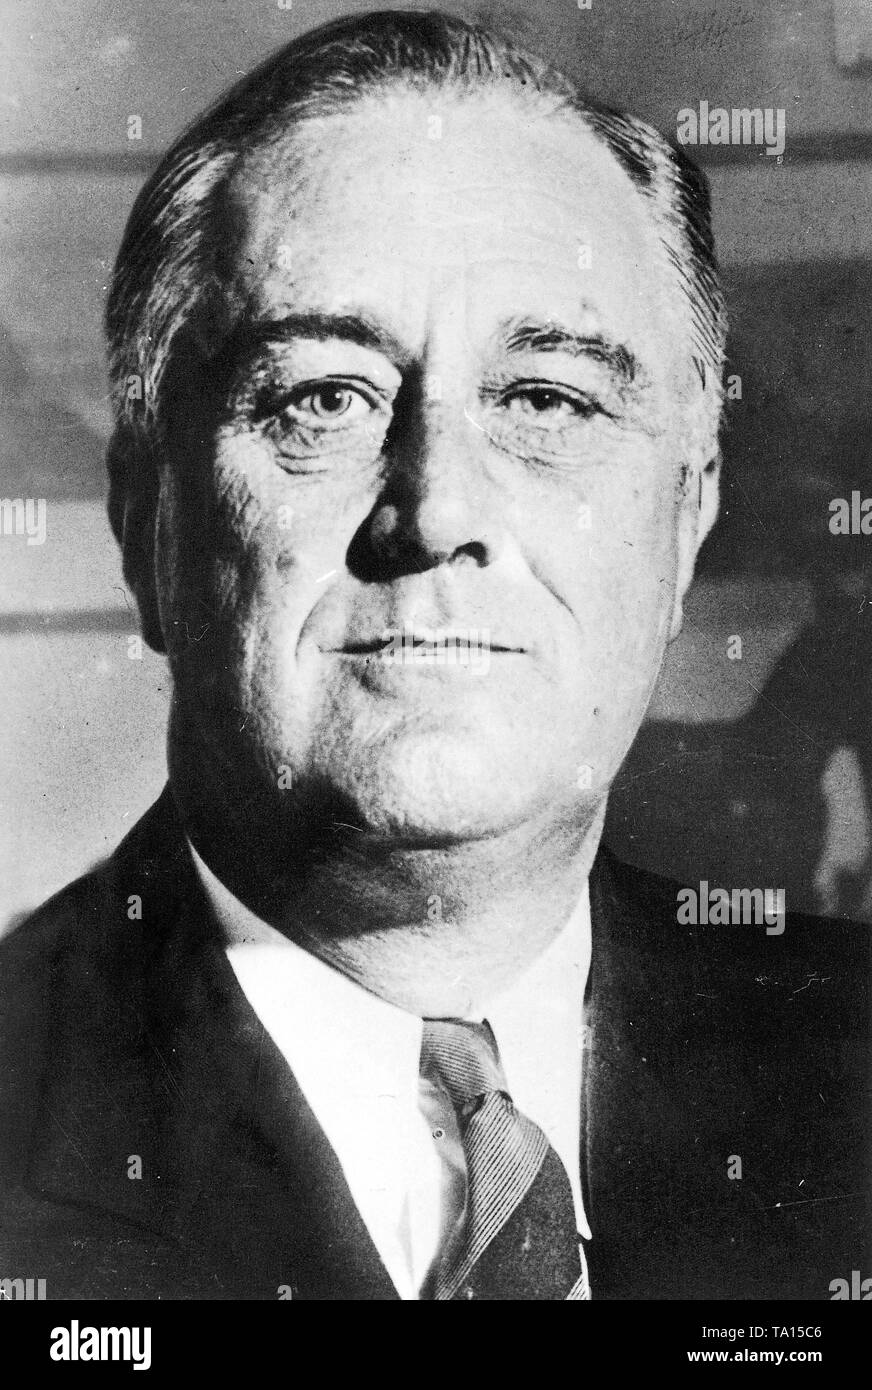 Franklin D. Roosevelt, the 32nd President of the United States of America and co-founder of the UN. Stock Photo